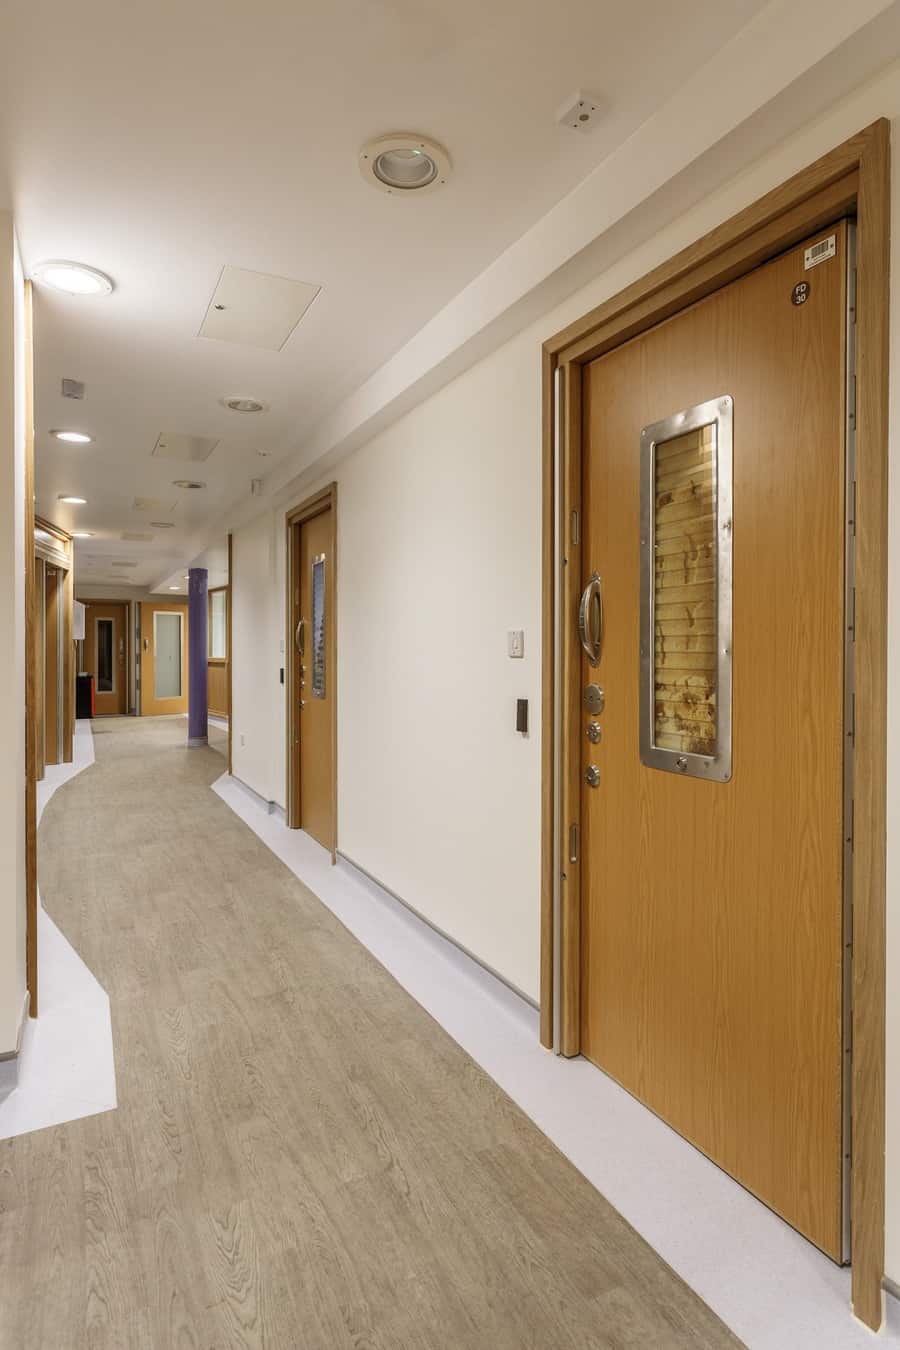  One of the corridors in the refurbished ward in the hospital 